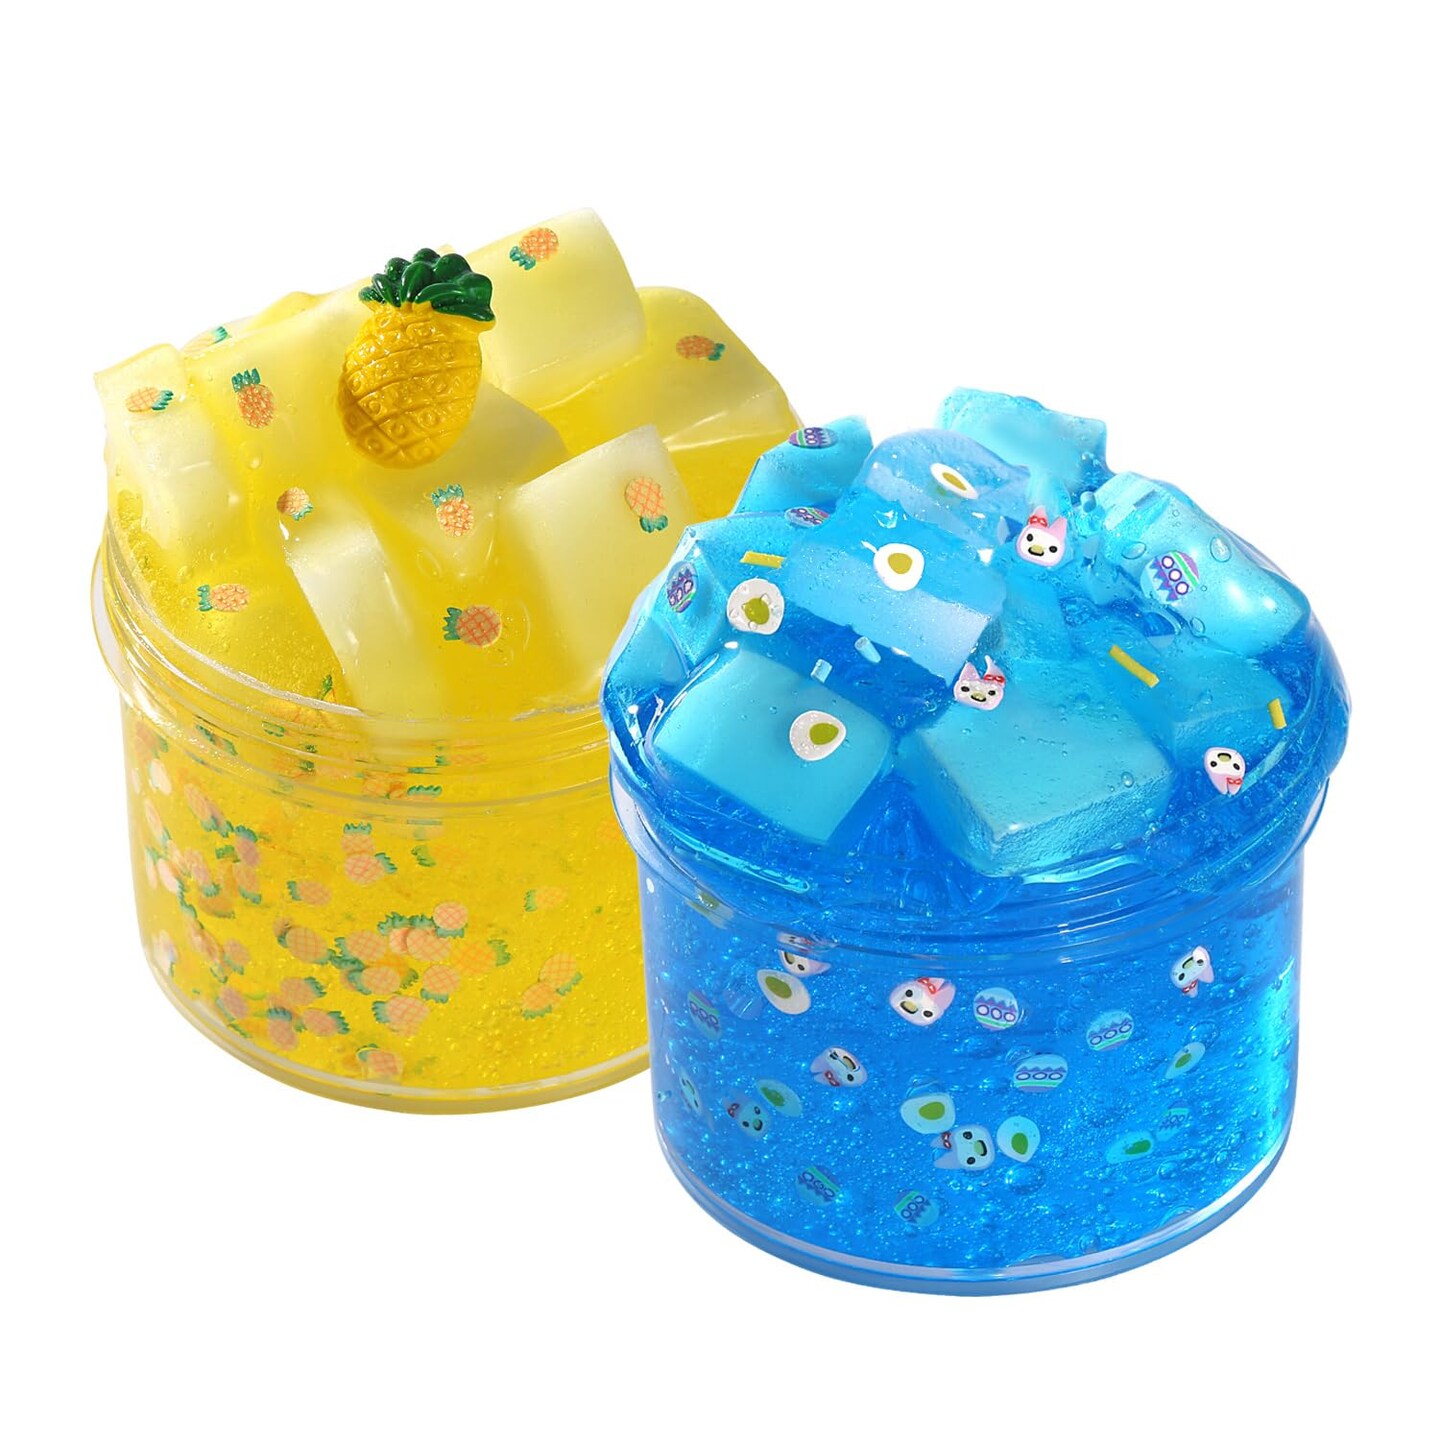 2 Packs Jelly Cube Crunchy Slime Kit,Non Sticky,Super Soft Sludge Toy,Birthday Gifts for Kids,DIY Crystal Glue Boba Slime Party Favor for Girls &#x26; Boys(Blue,Yellow)